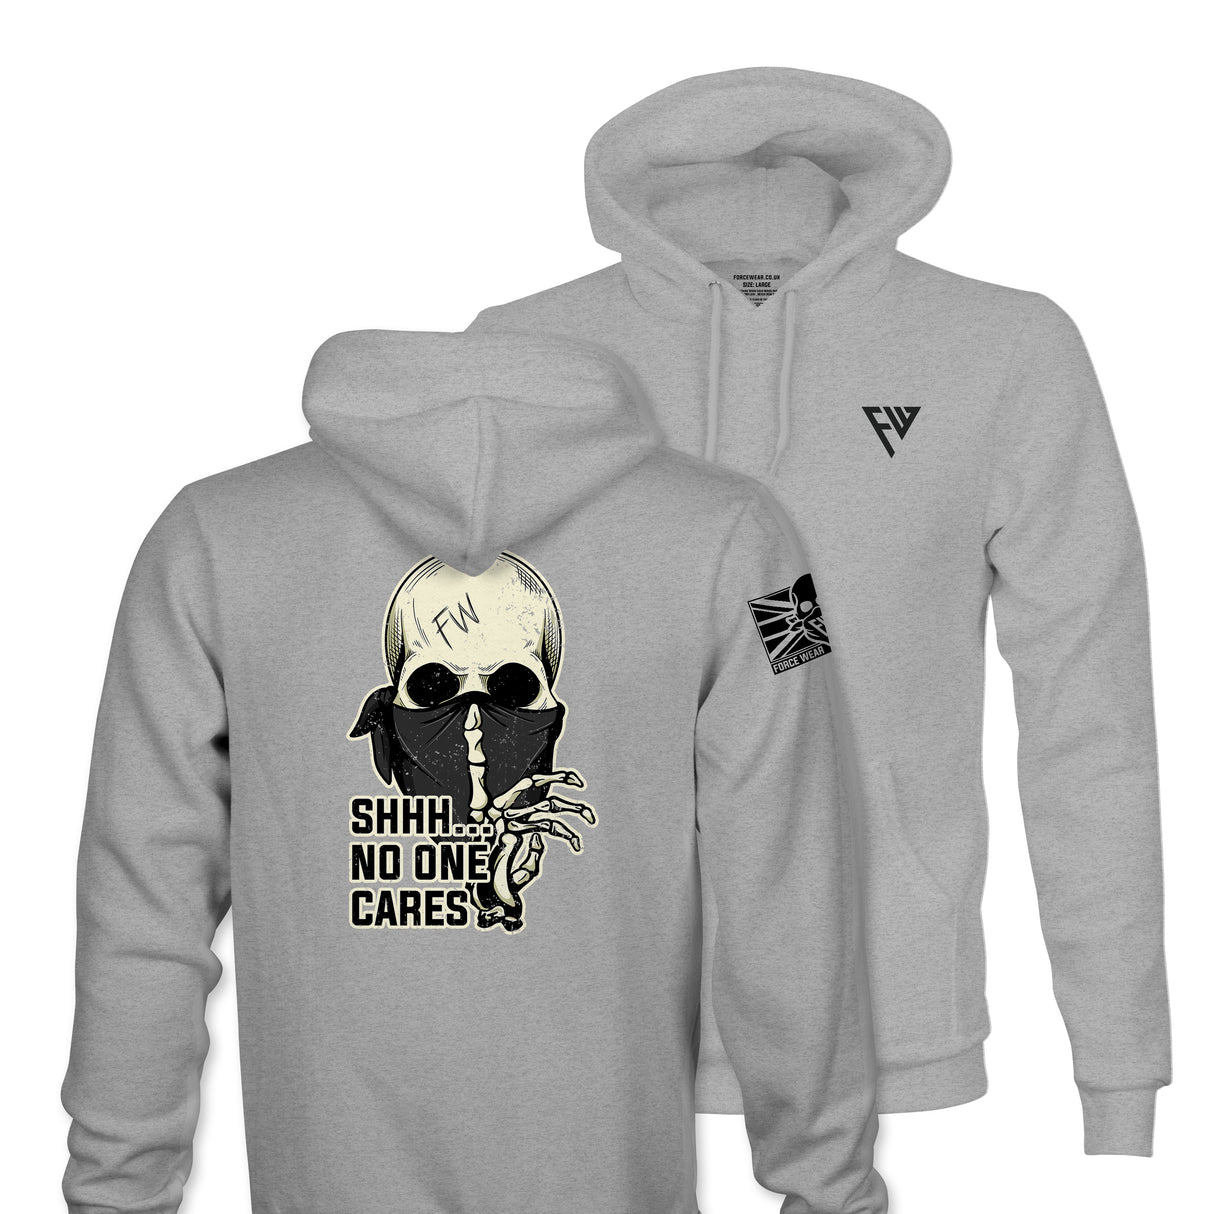 NO ONE CARES TAG AND BACK HOODIE